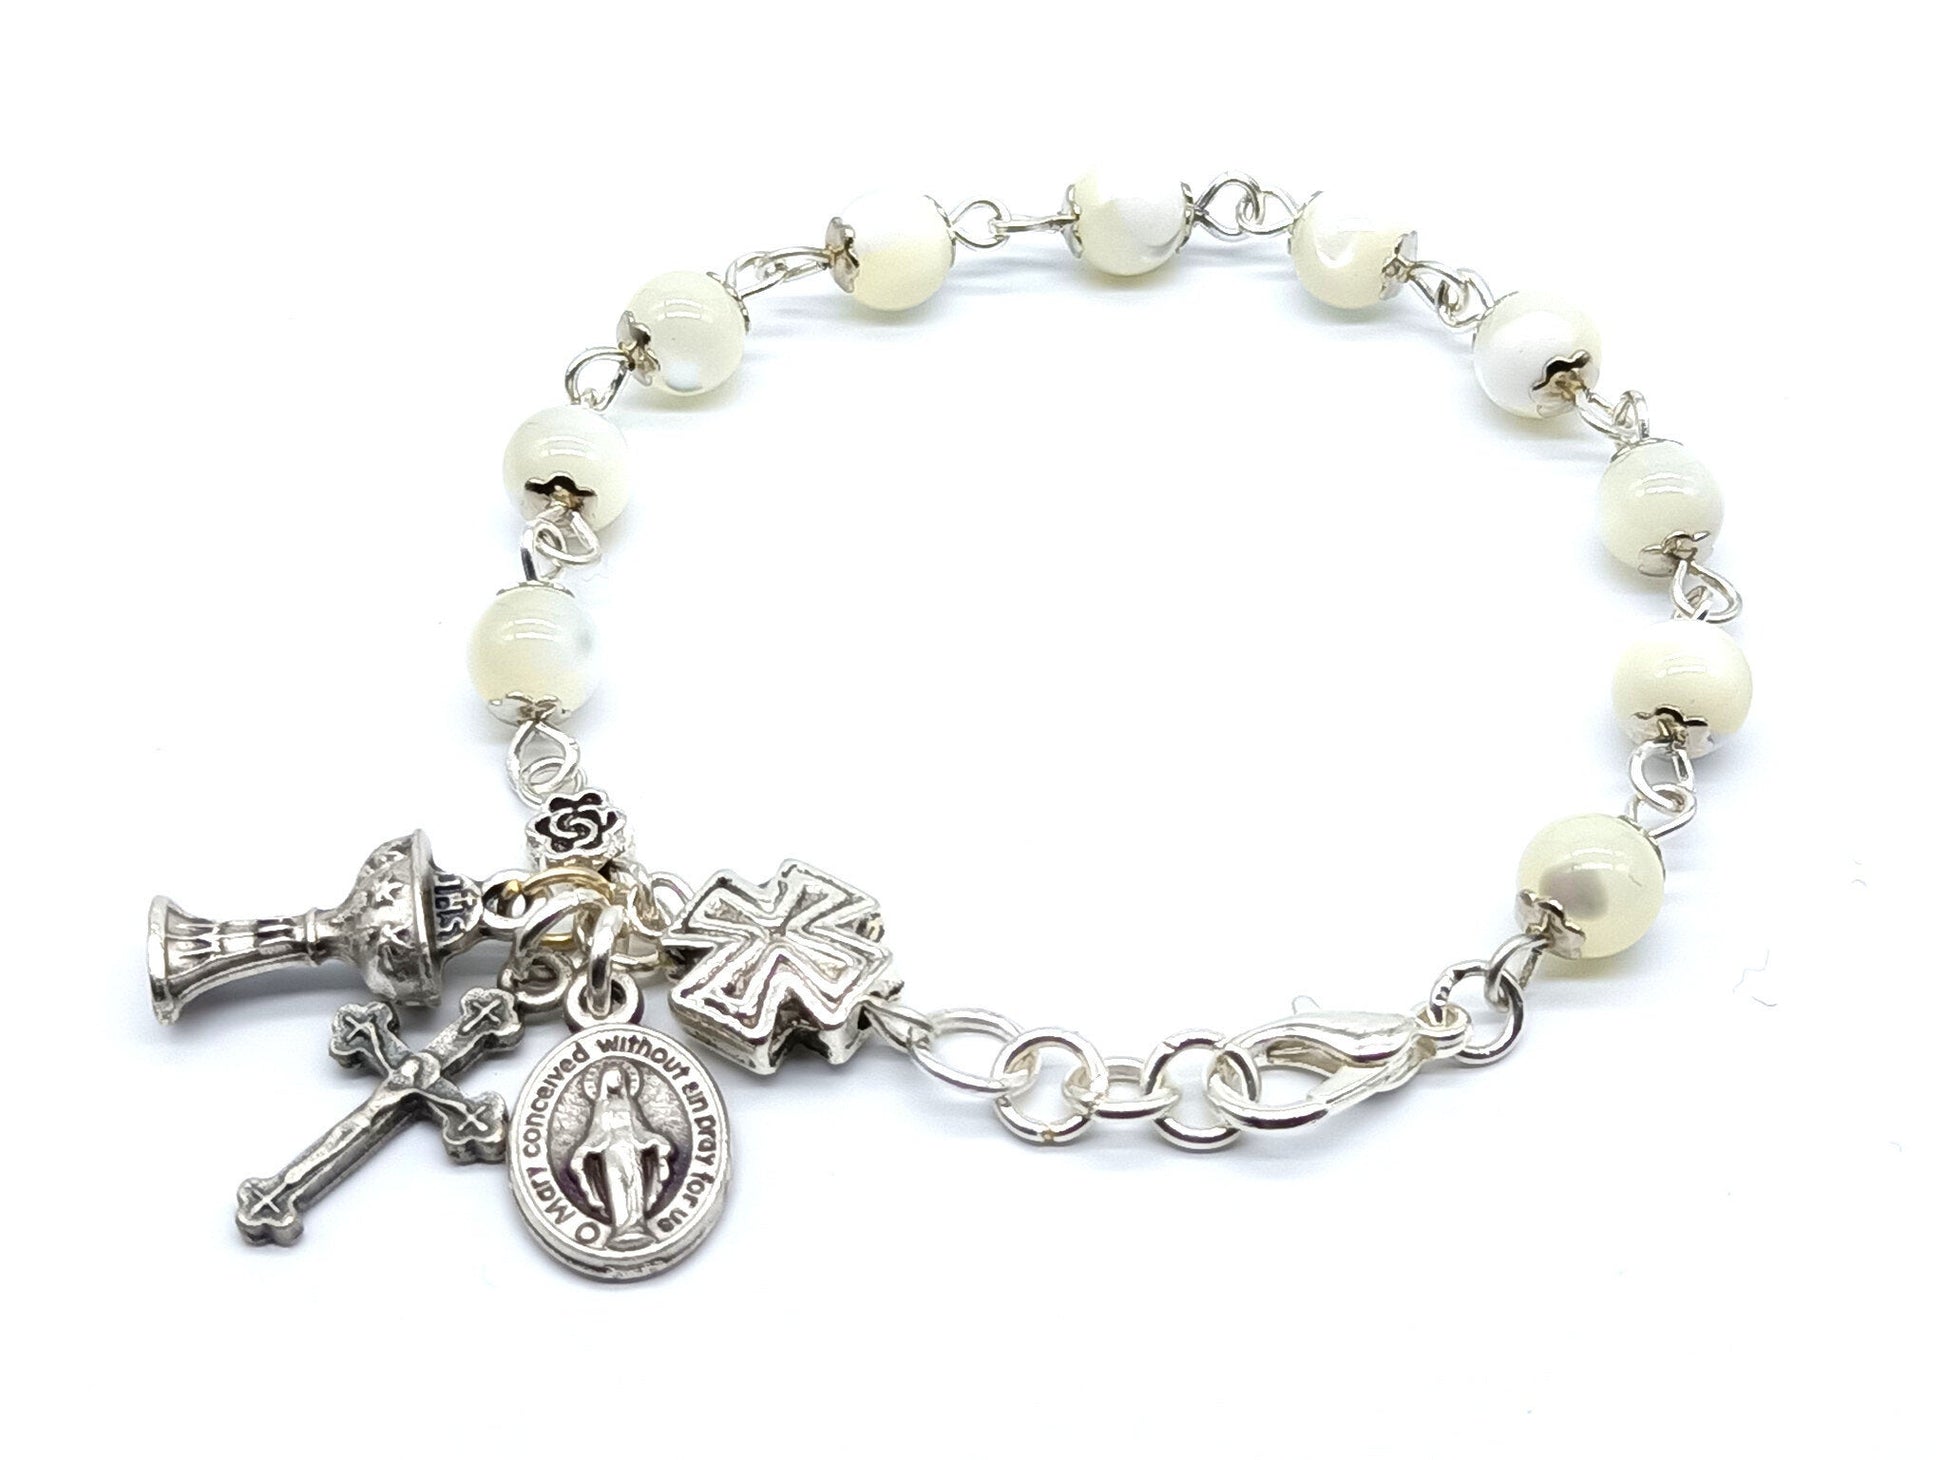 Mother of pearl unique rosary beads single decade bracelet with silver crucifix, chalice medal and miraculous medal.